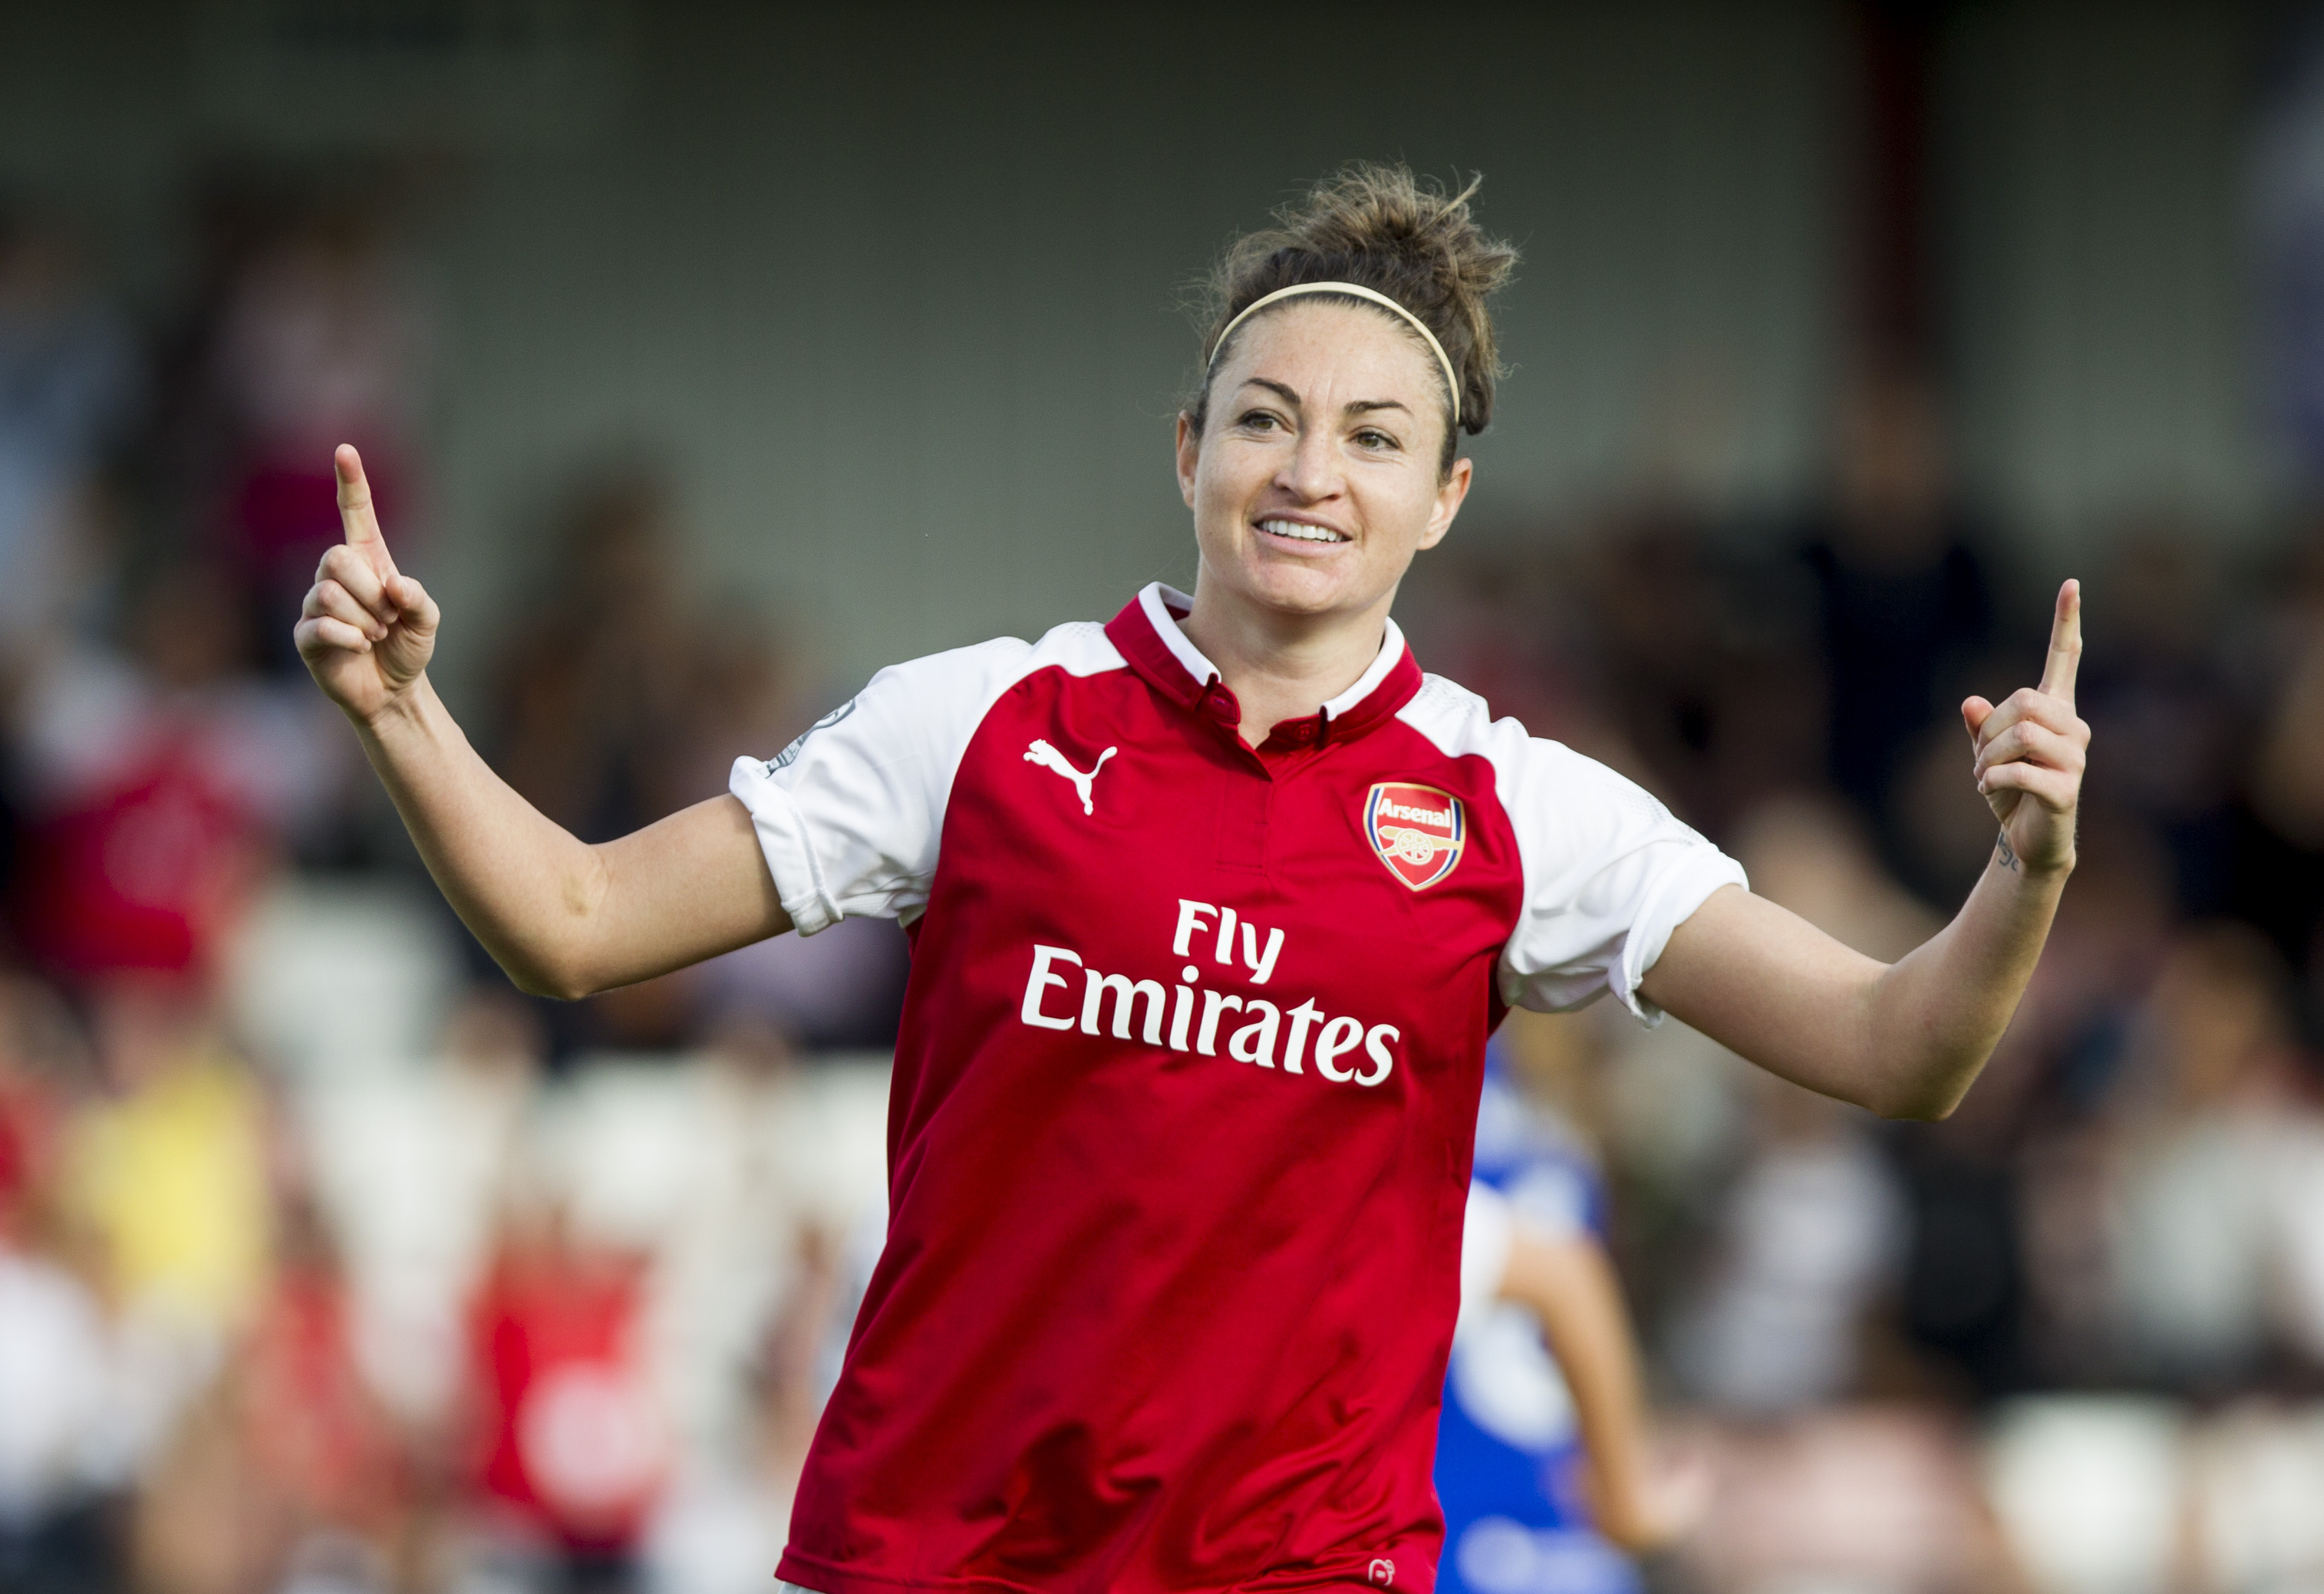 Jodie Taylor returns to Arsenal Women in off-field role